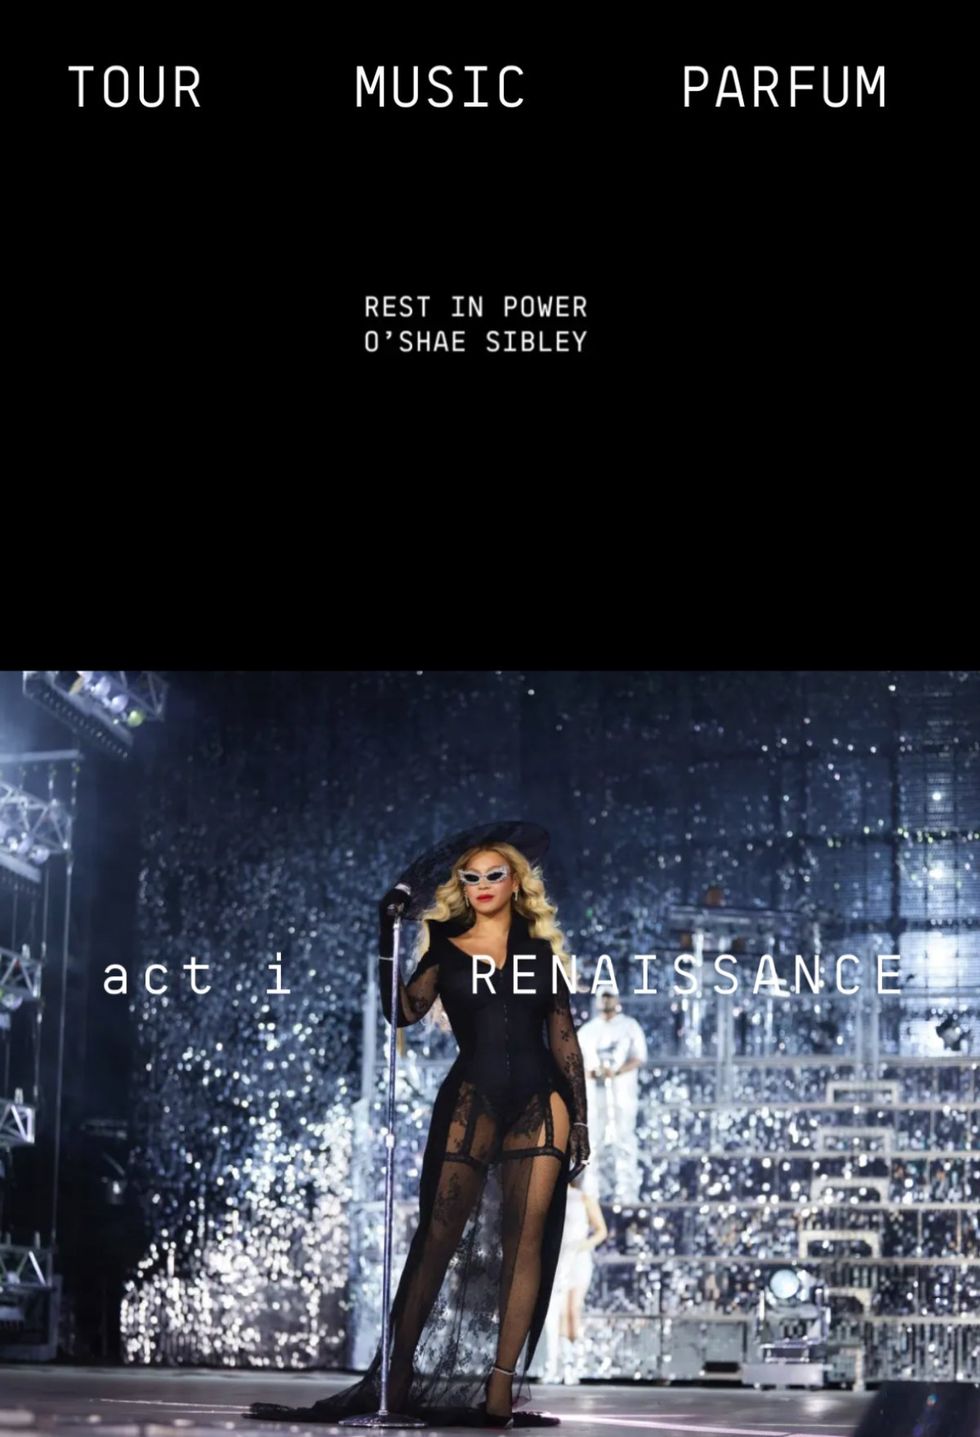 Beyonce's tribute to O\u2019Shae Sibley